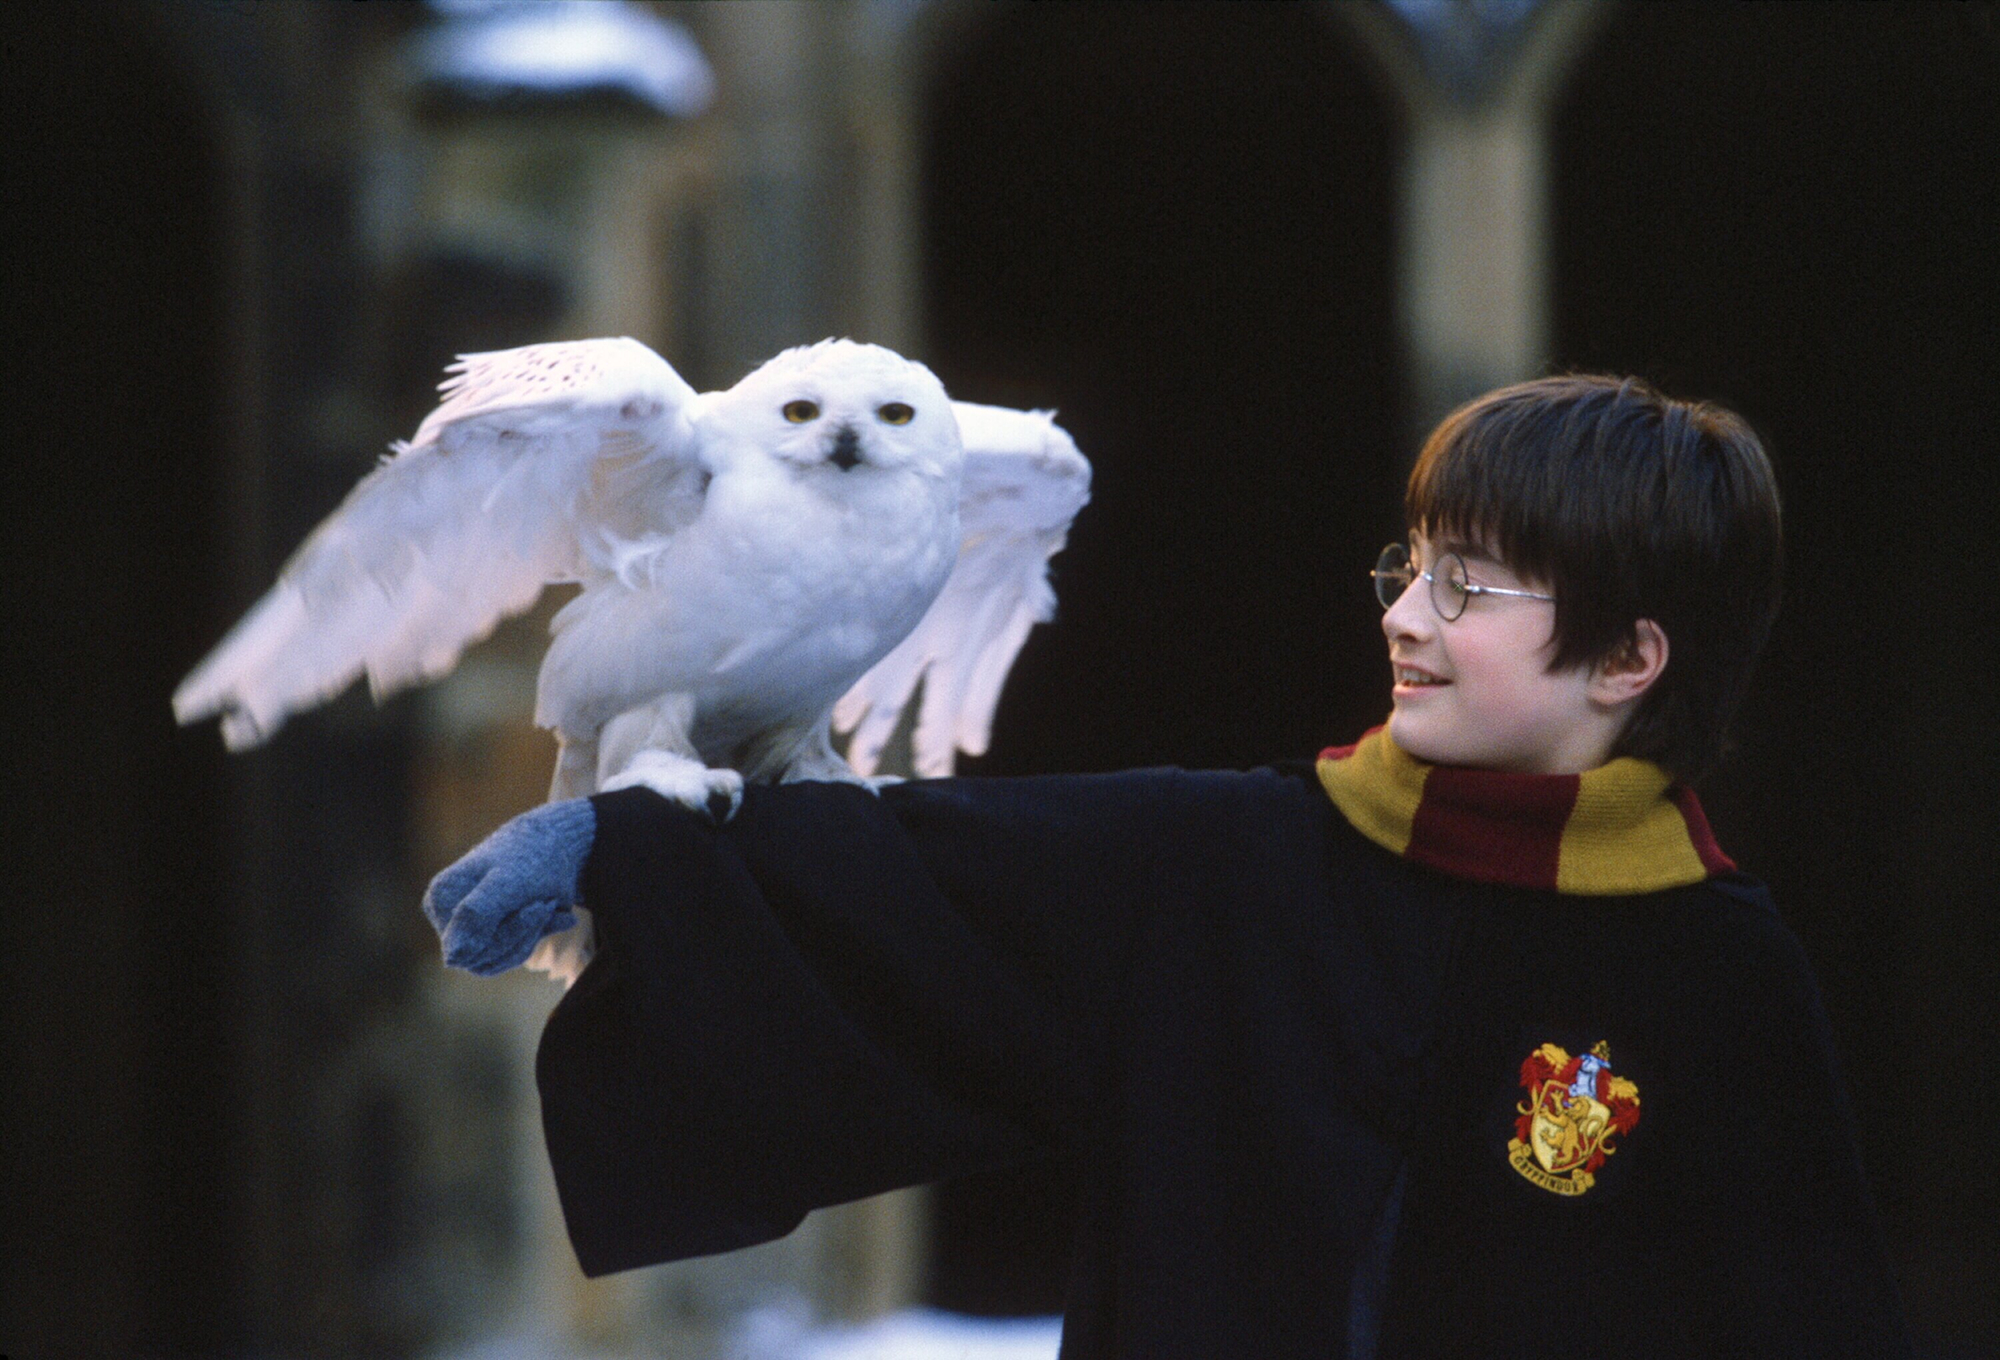 harry potter and the philosopher's stone, daniel radcliffe, harry potter, movie, snowy owl